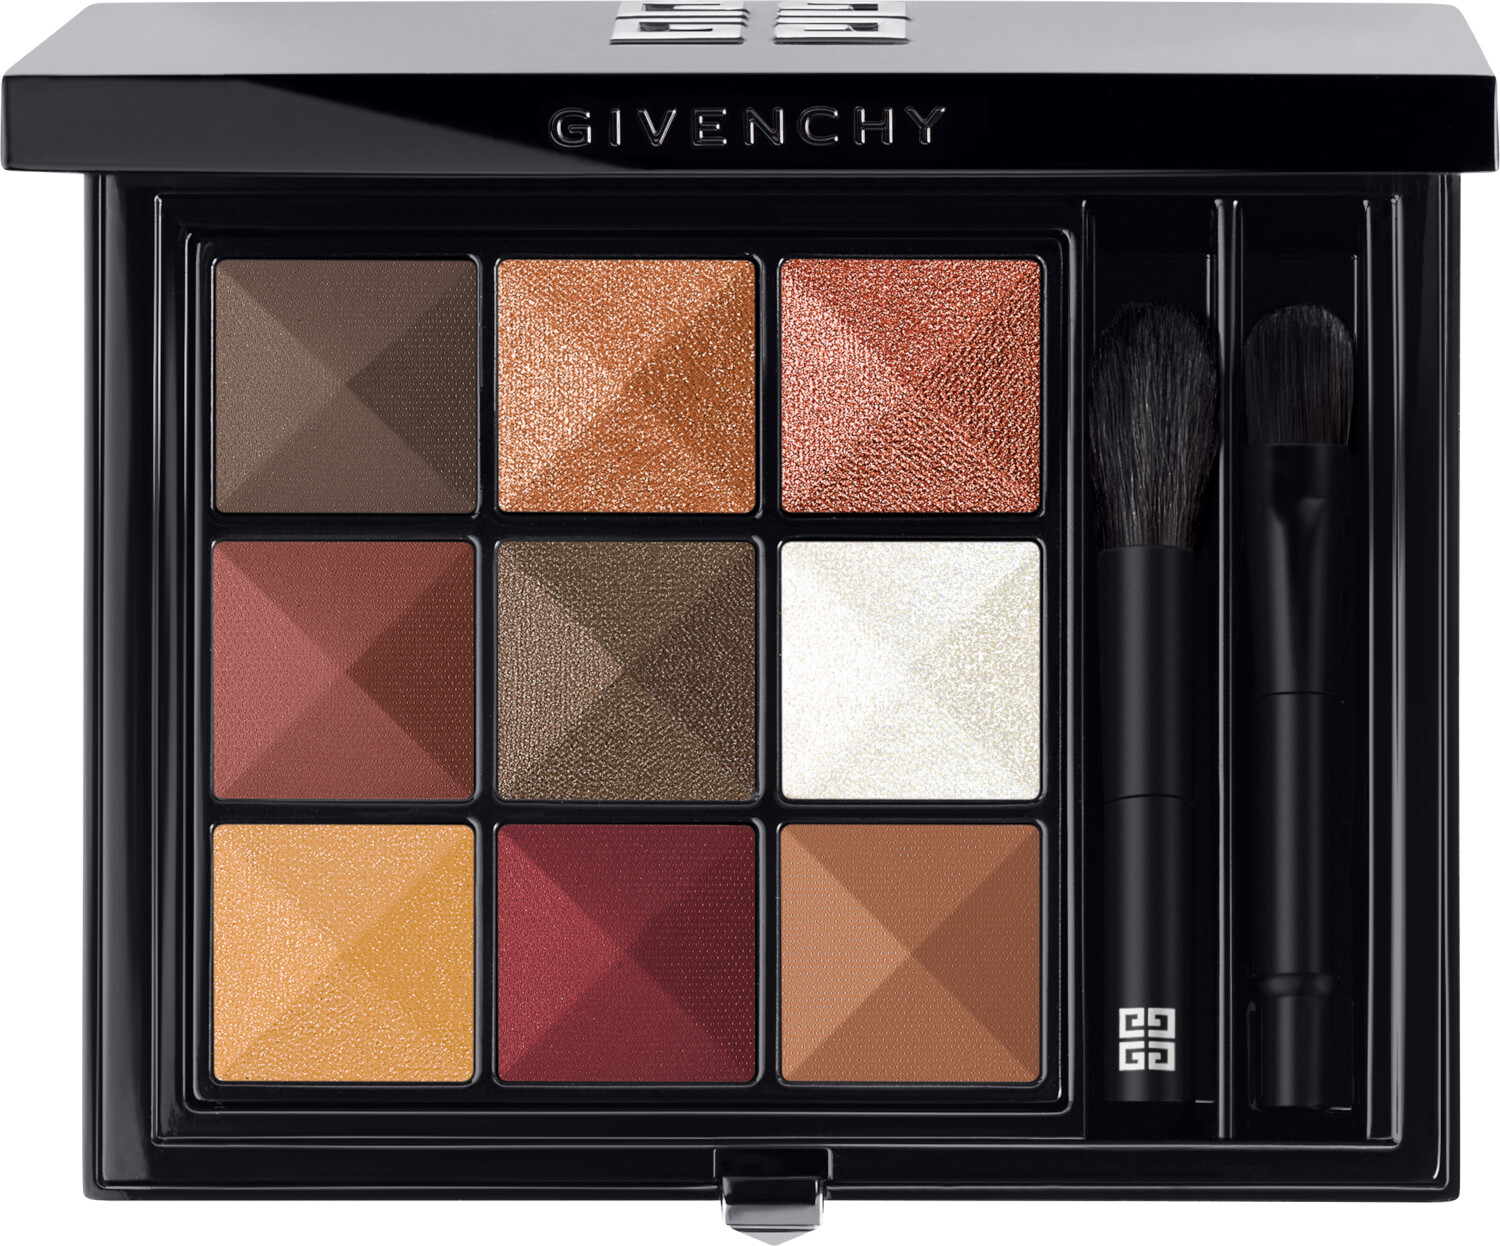 GIVENCHY Le 9 De Givenchy Eyeshadow Palette 8g Le 9.05